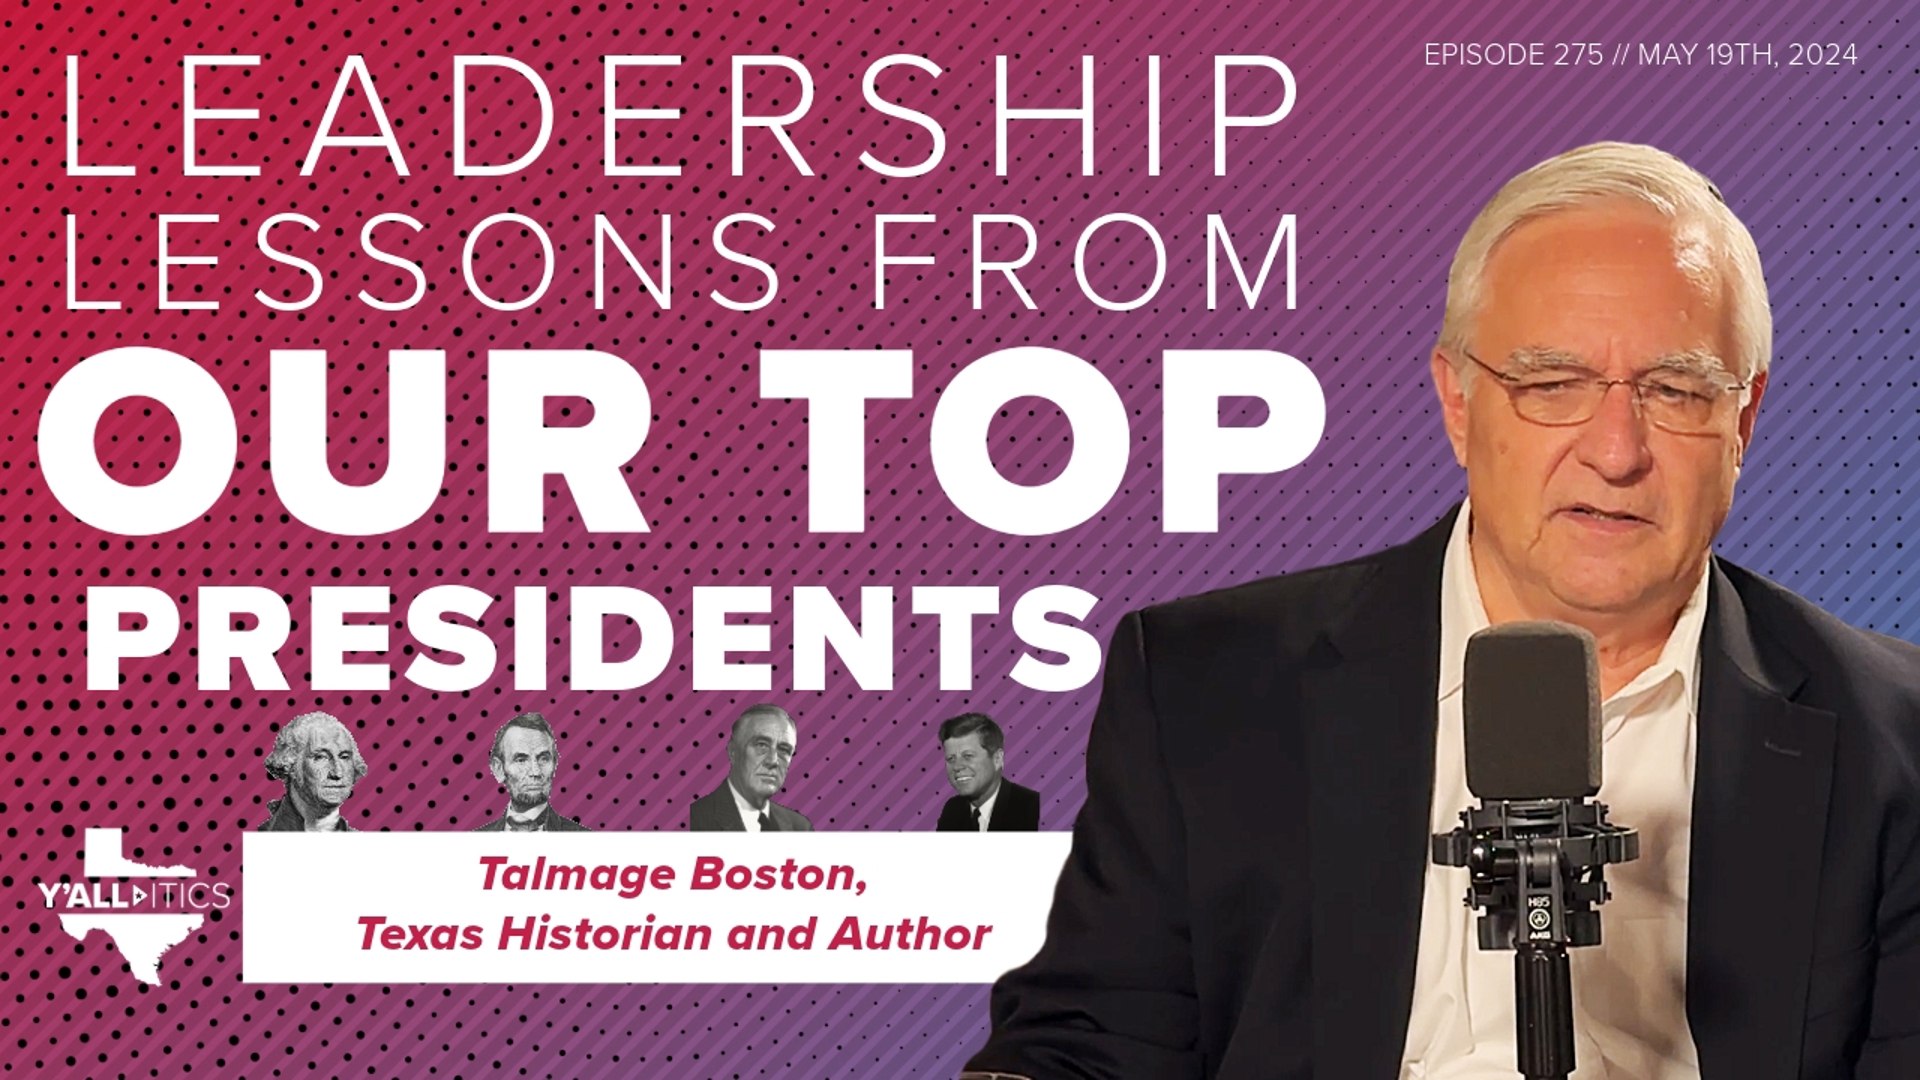 The Jasons got a history lesson in this episode from Talmage Boston, author of “How the Best Did It: Leadership Lessons From Our Top Presidents”.